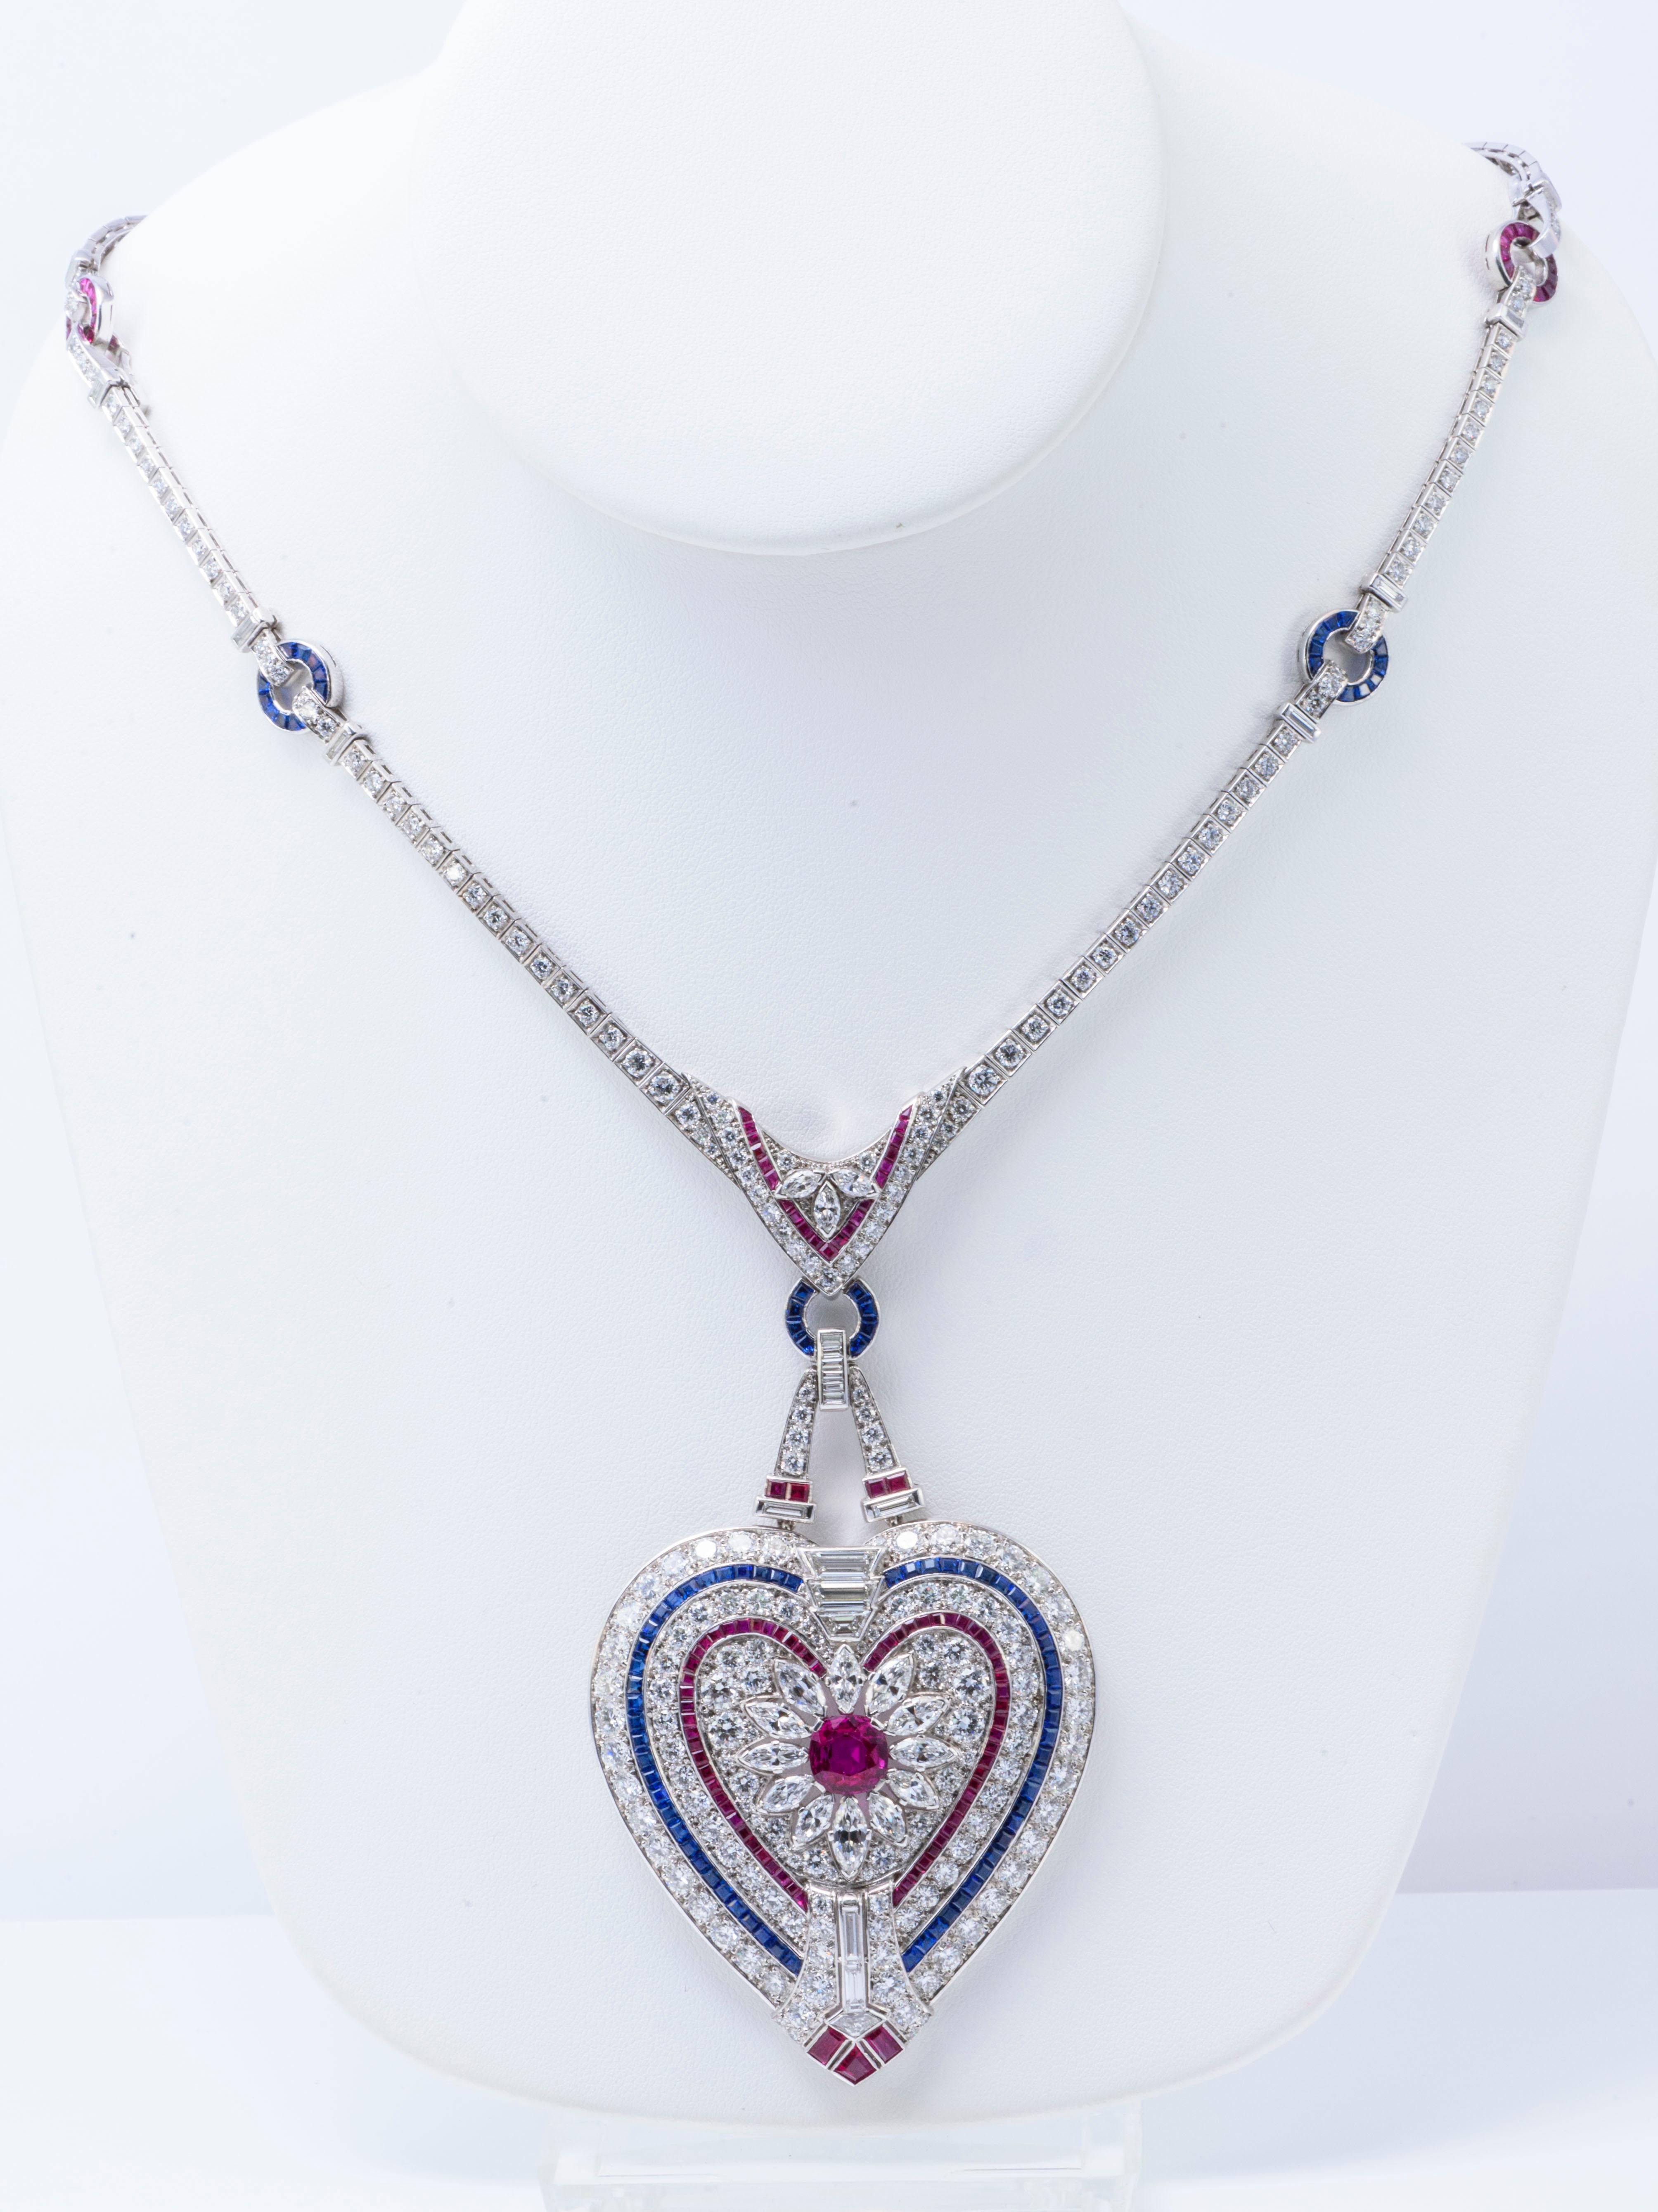 Suspending a variously-cut diamond, calibré-cut ruby and sapphire heart- shaped plaque, centering upon a circular-cut ruby, to the variously-cut diamond neck chain with altering calibré-cut ruby and sapphire links, 18 inches, mounted in platinum. 